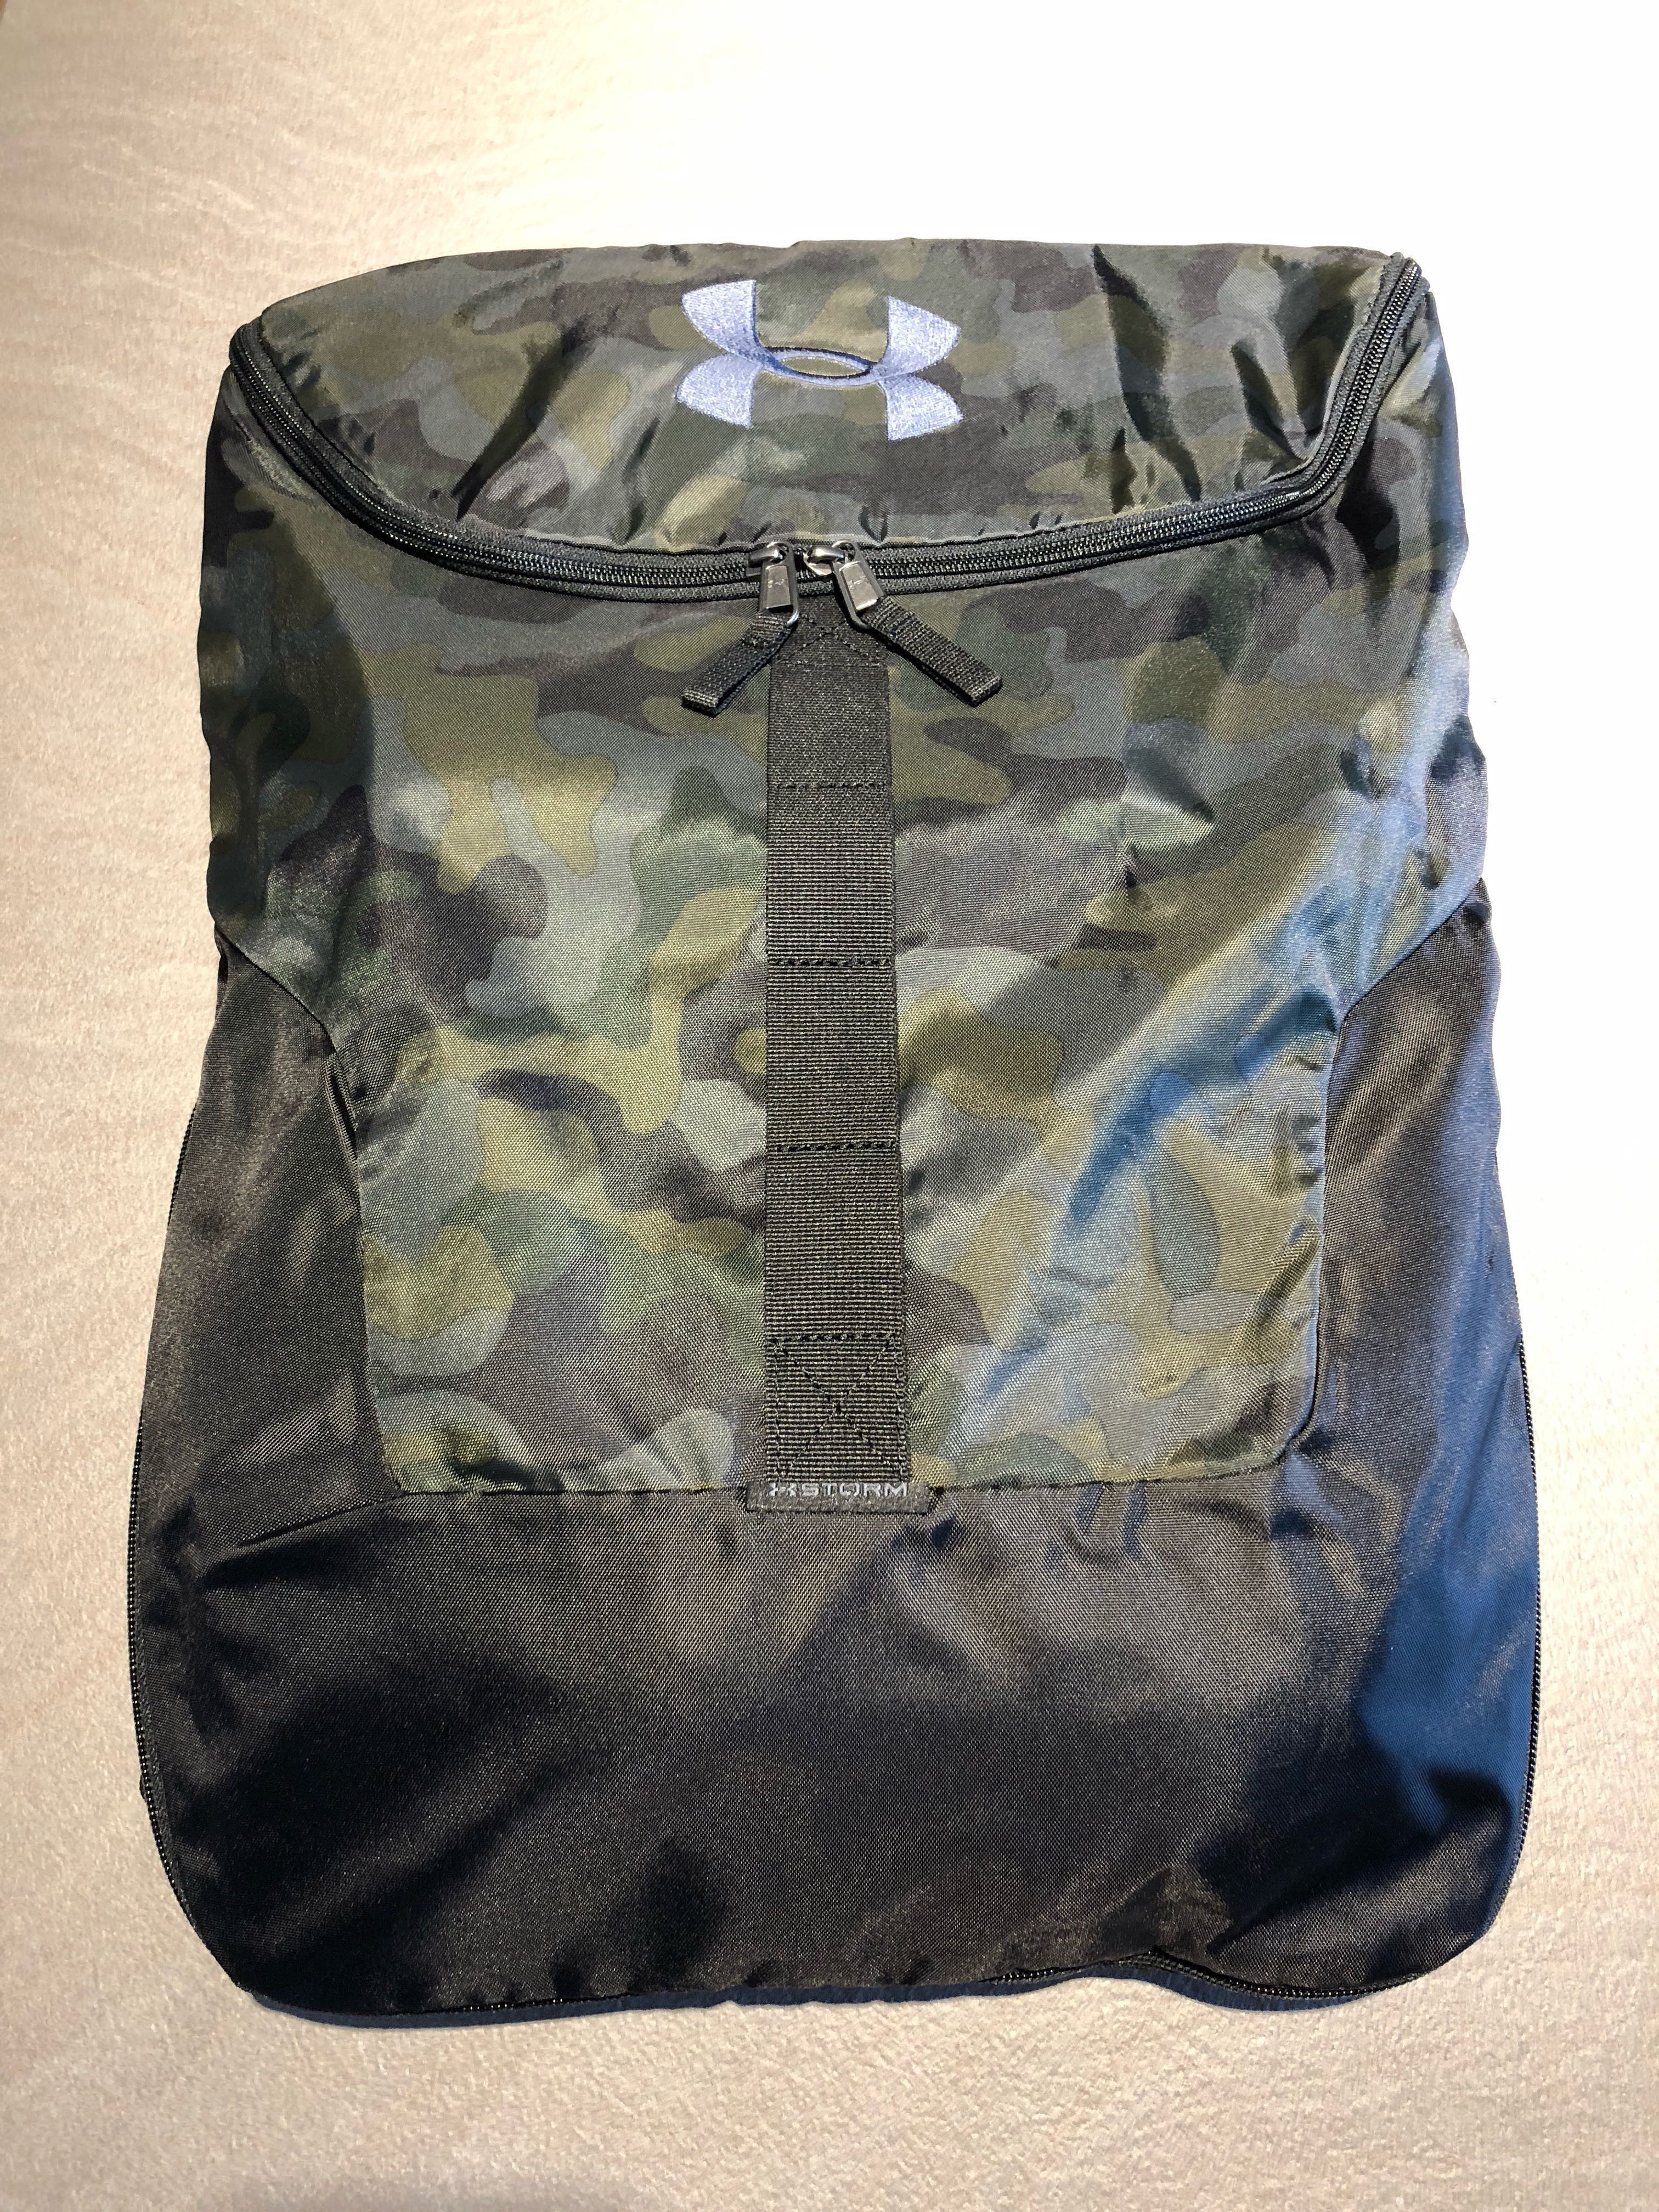 under armor camo backpack